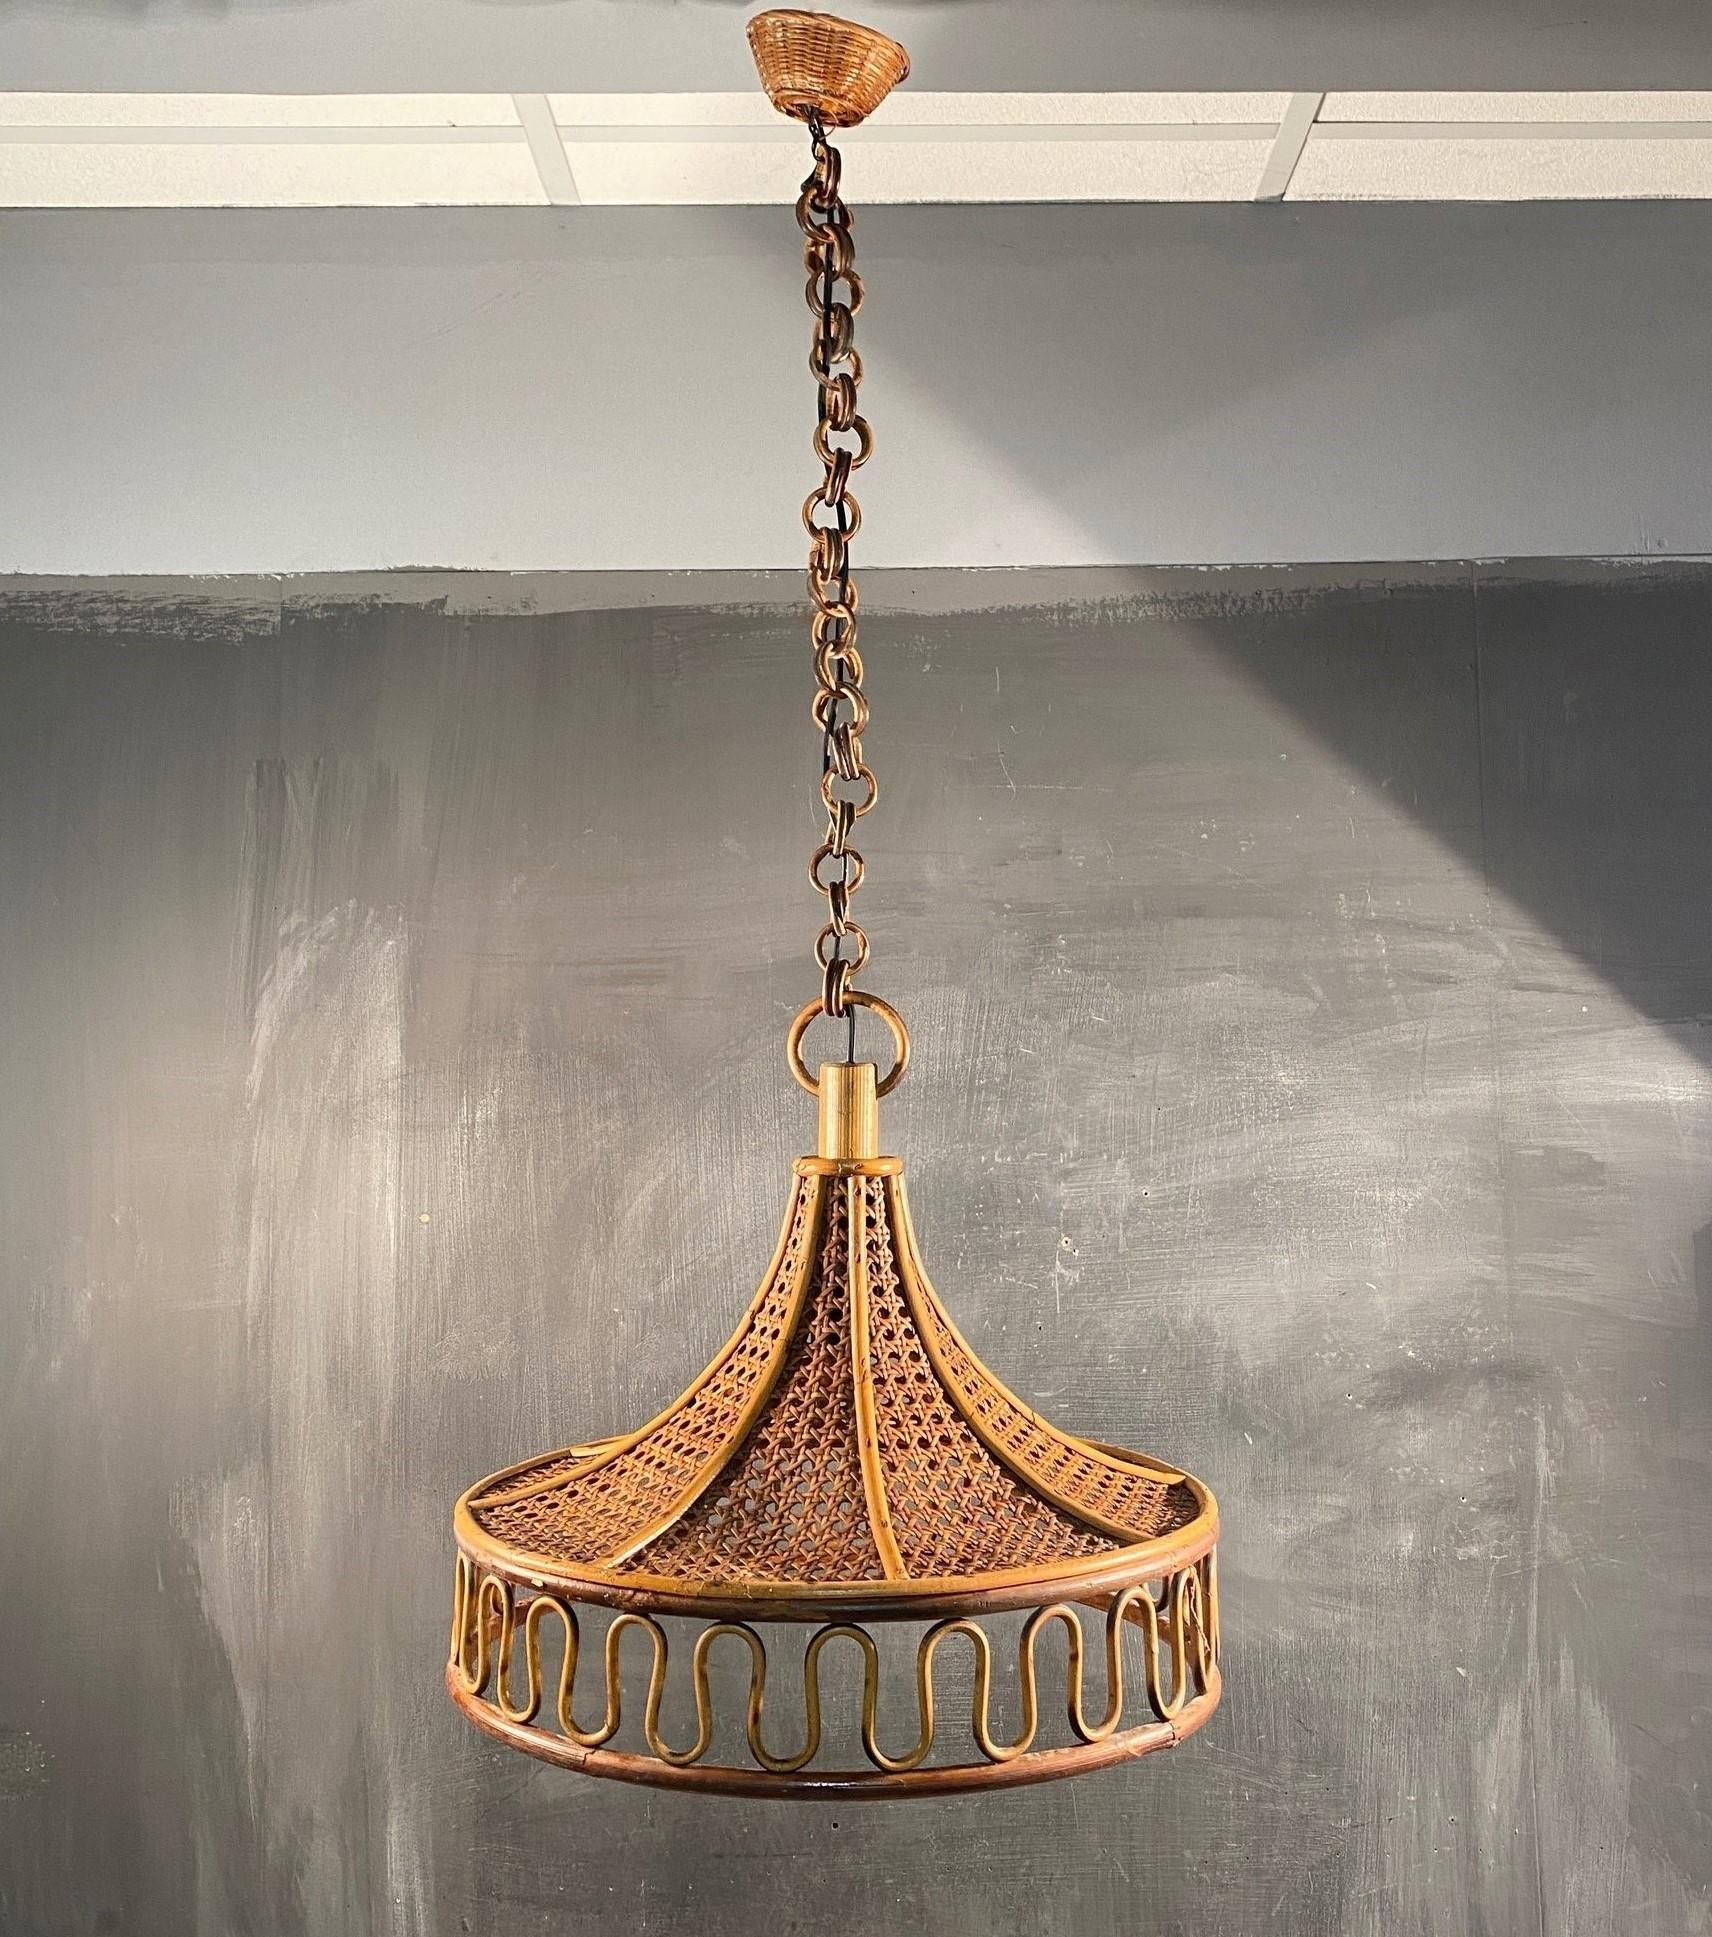 Mid-century bamboo and wicker pendant, Denmark, 1950s. This beautiful suspension lamp is entirely handcrafted in bamboo and woven wicker provinding a warm and pleasant light. The chain is composed of bamboo round links topped by a wicker canopy. The